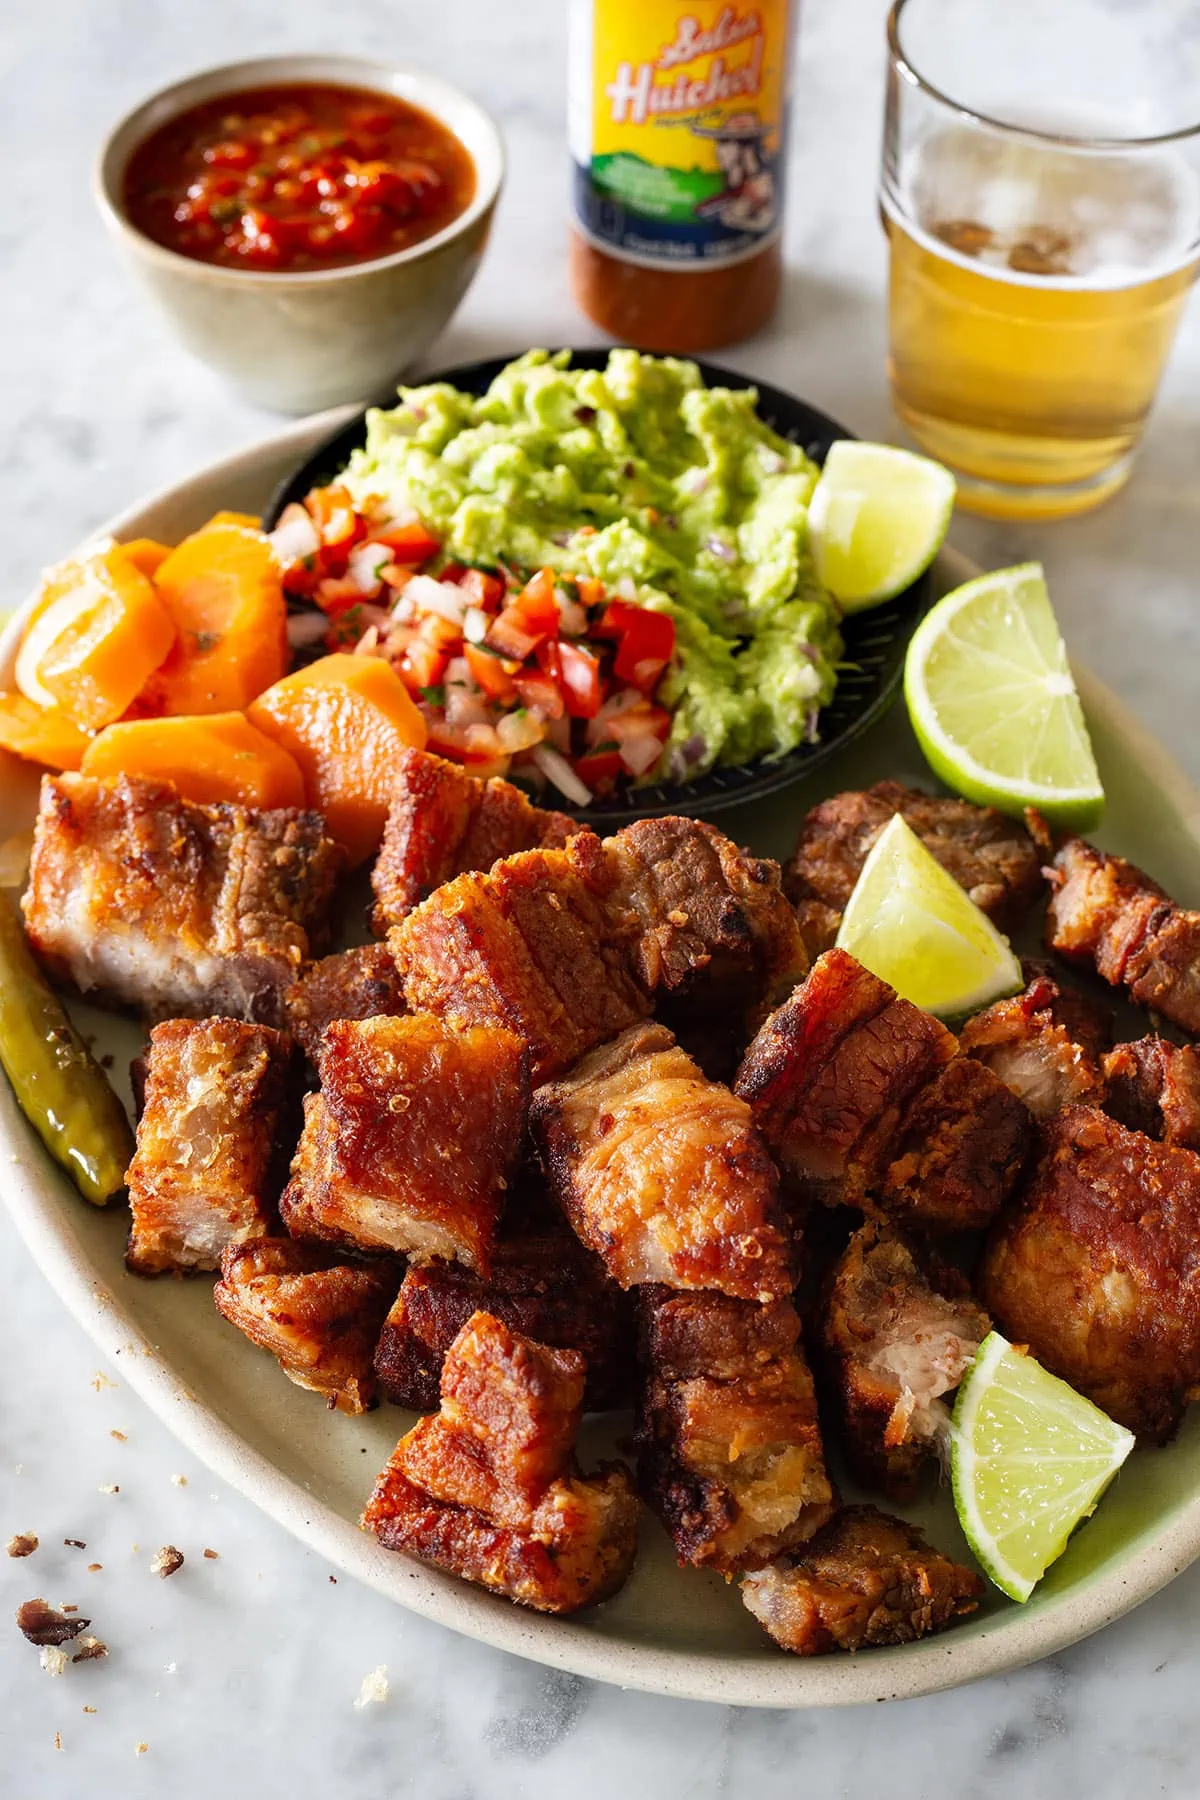 A plate of shredded pork belly with guacamole.